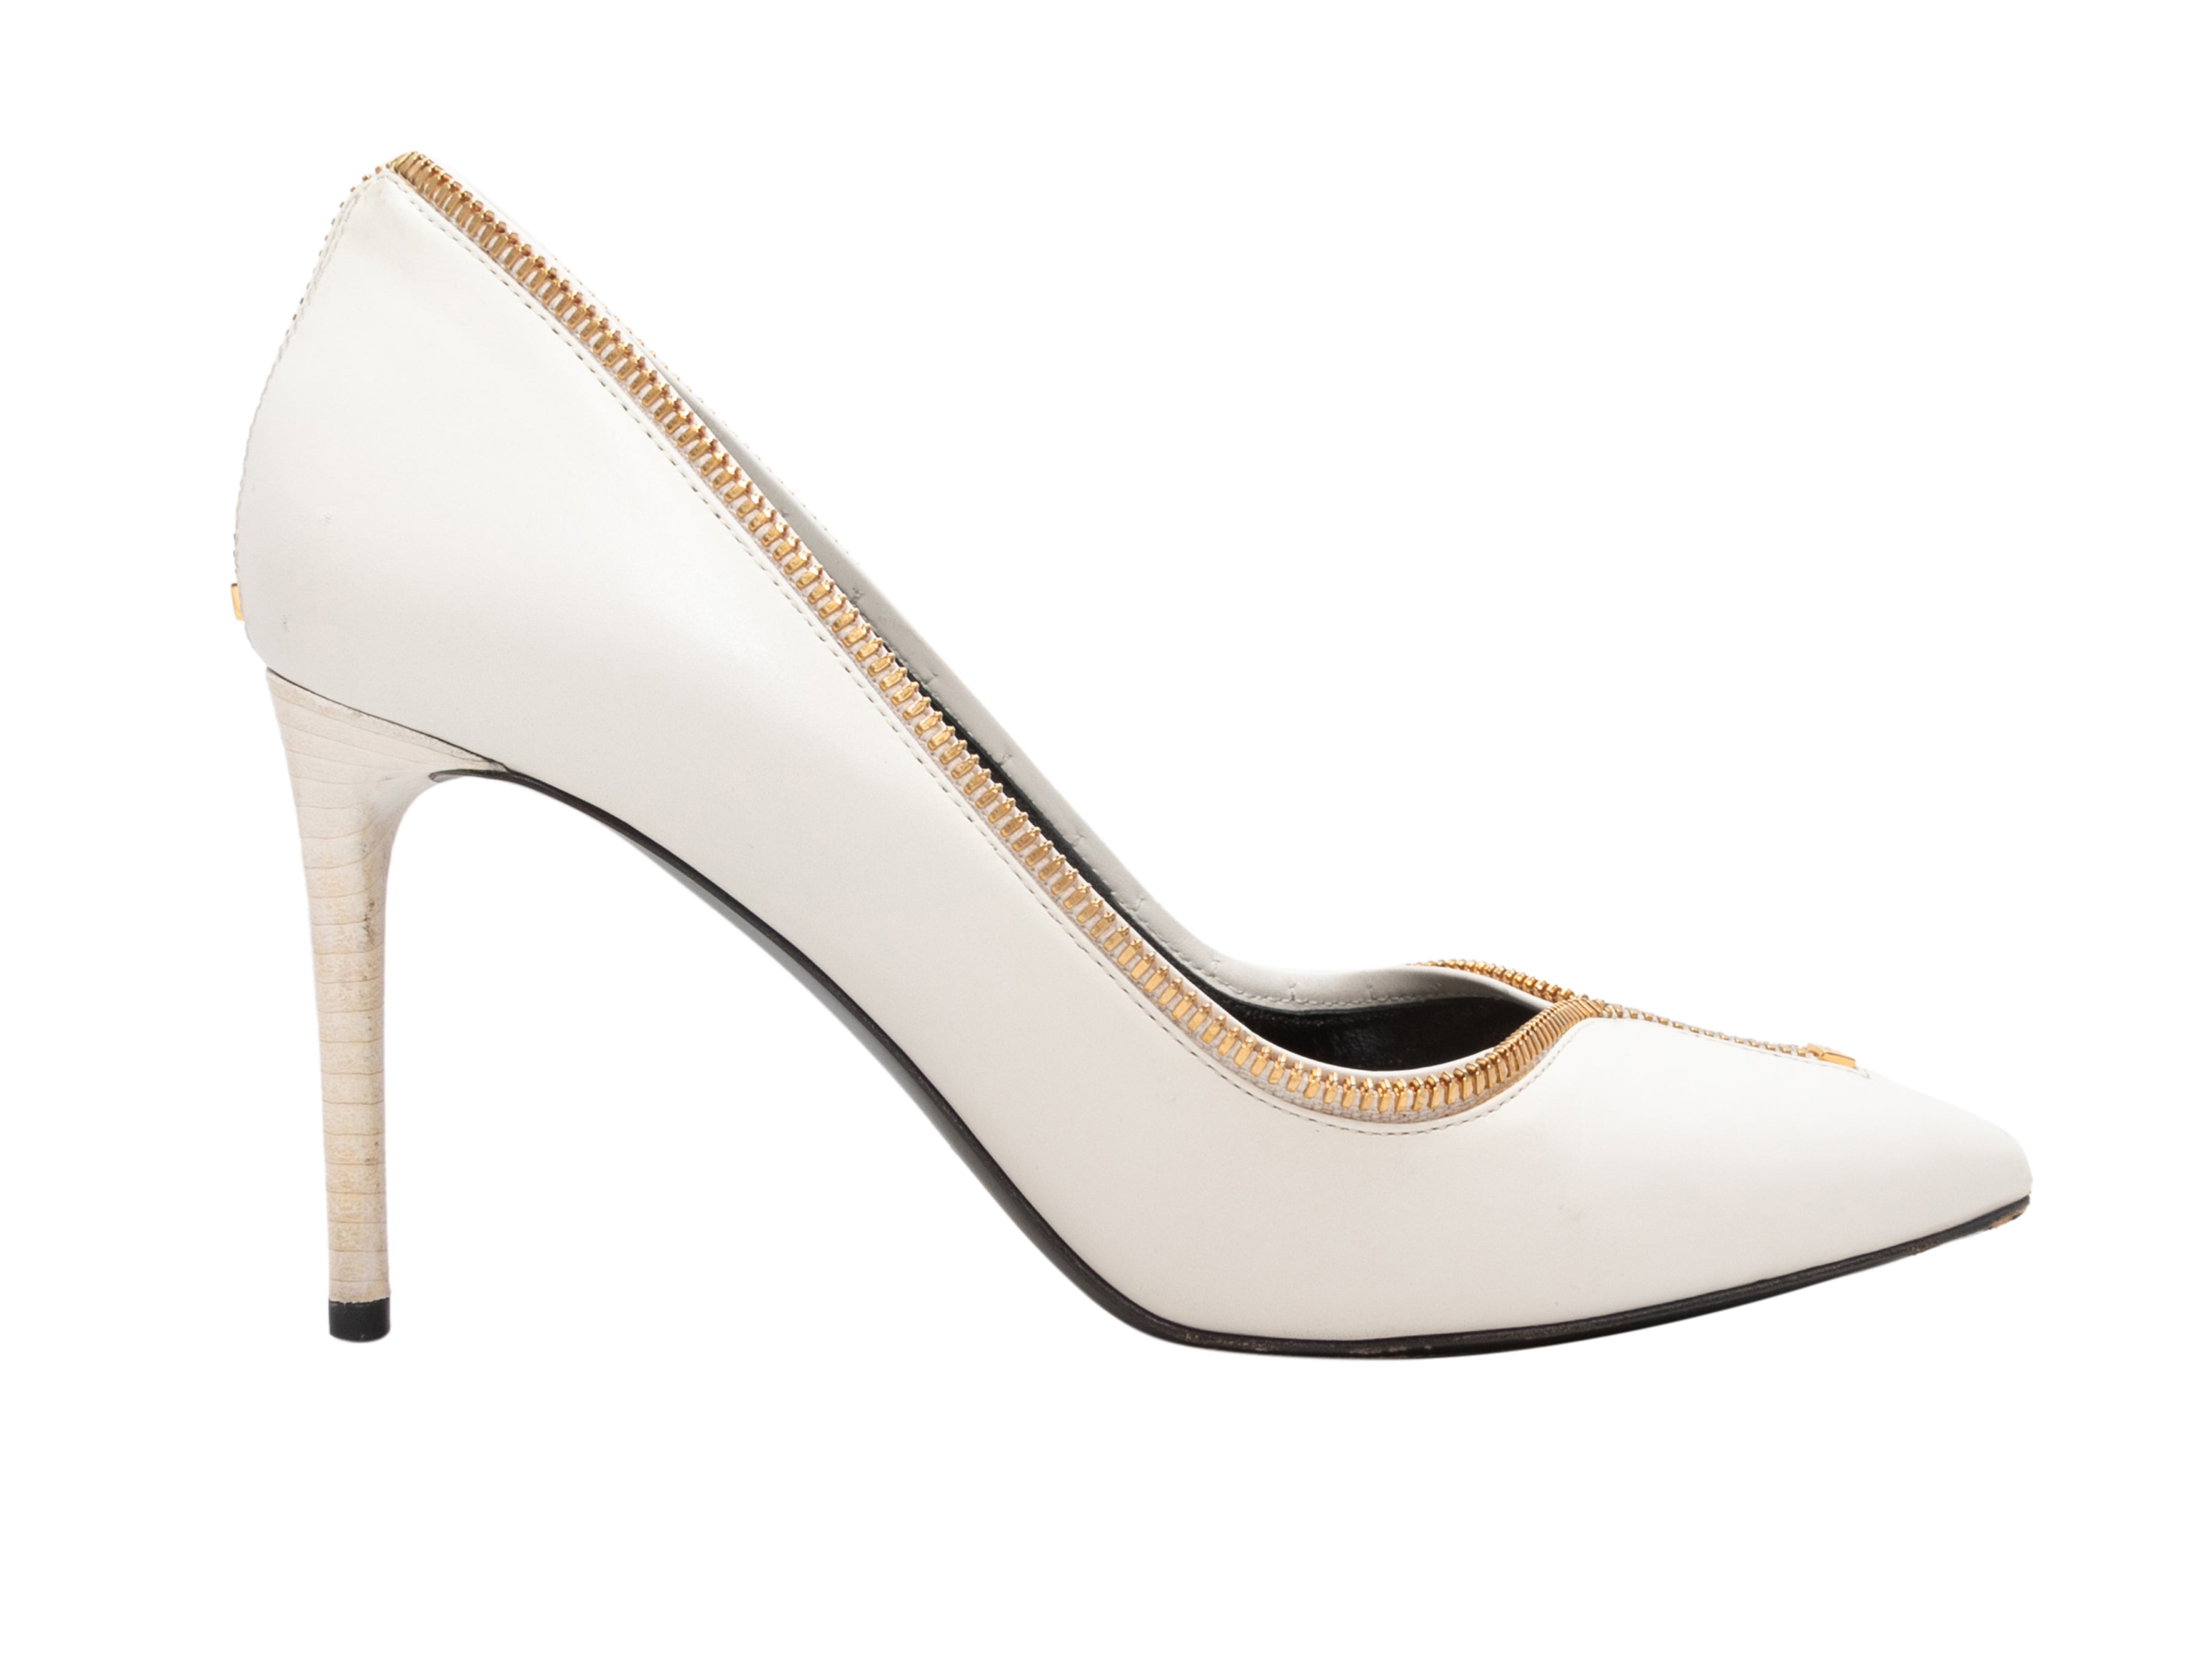 White & Gold-Tone Tom Ford Pointed-Toe Zipper Pumps Size 37 - Designer Revival